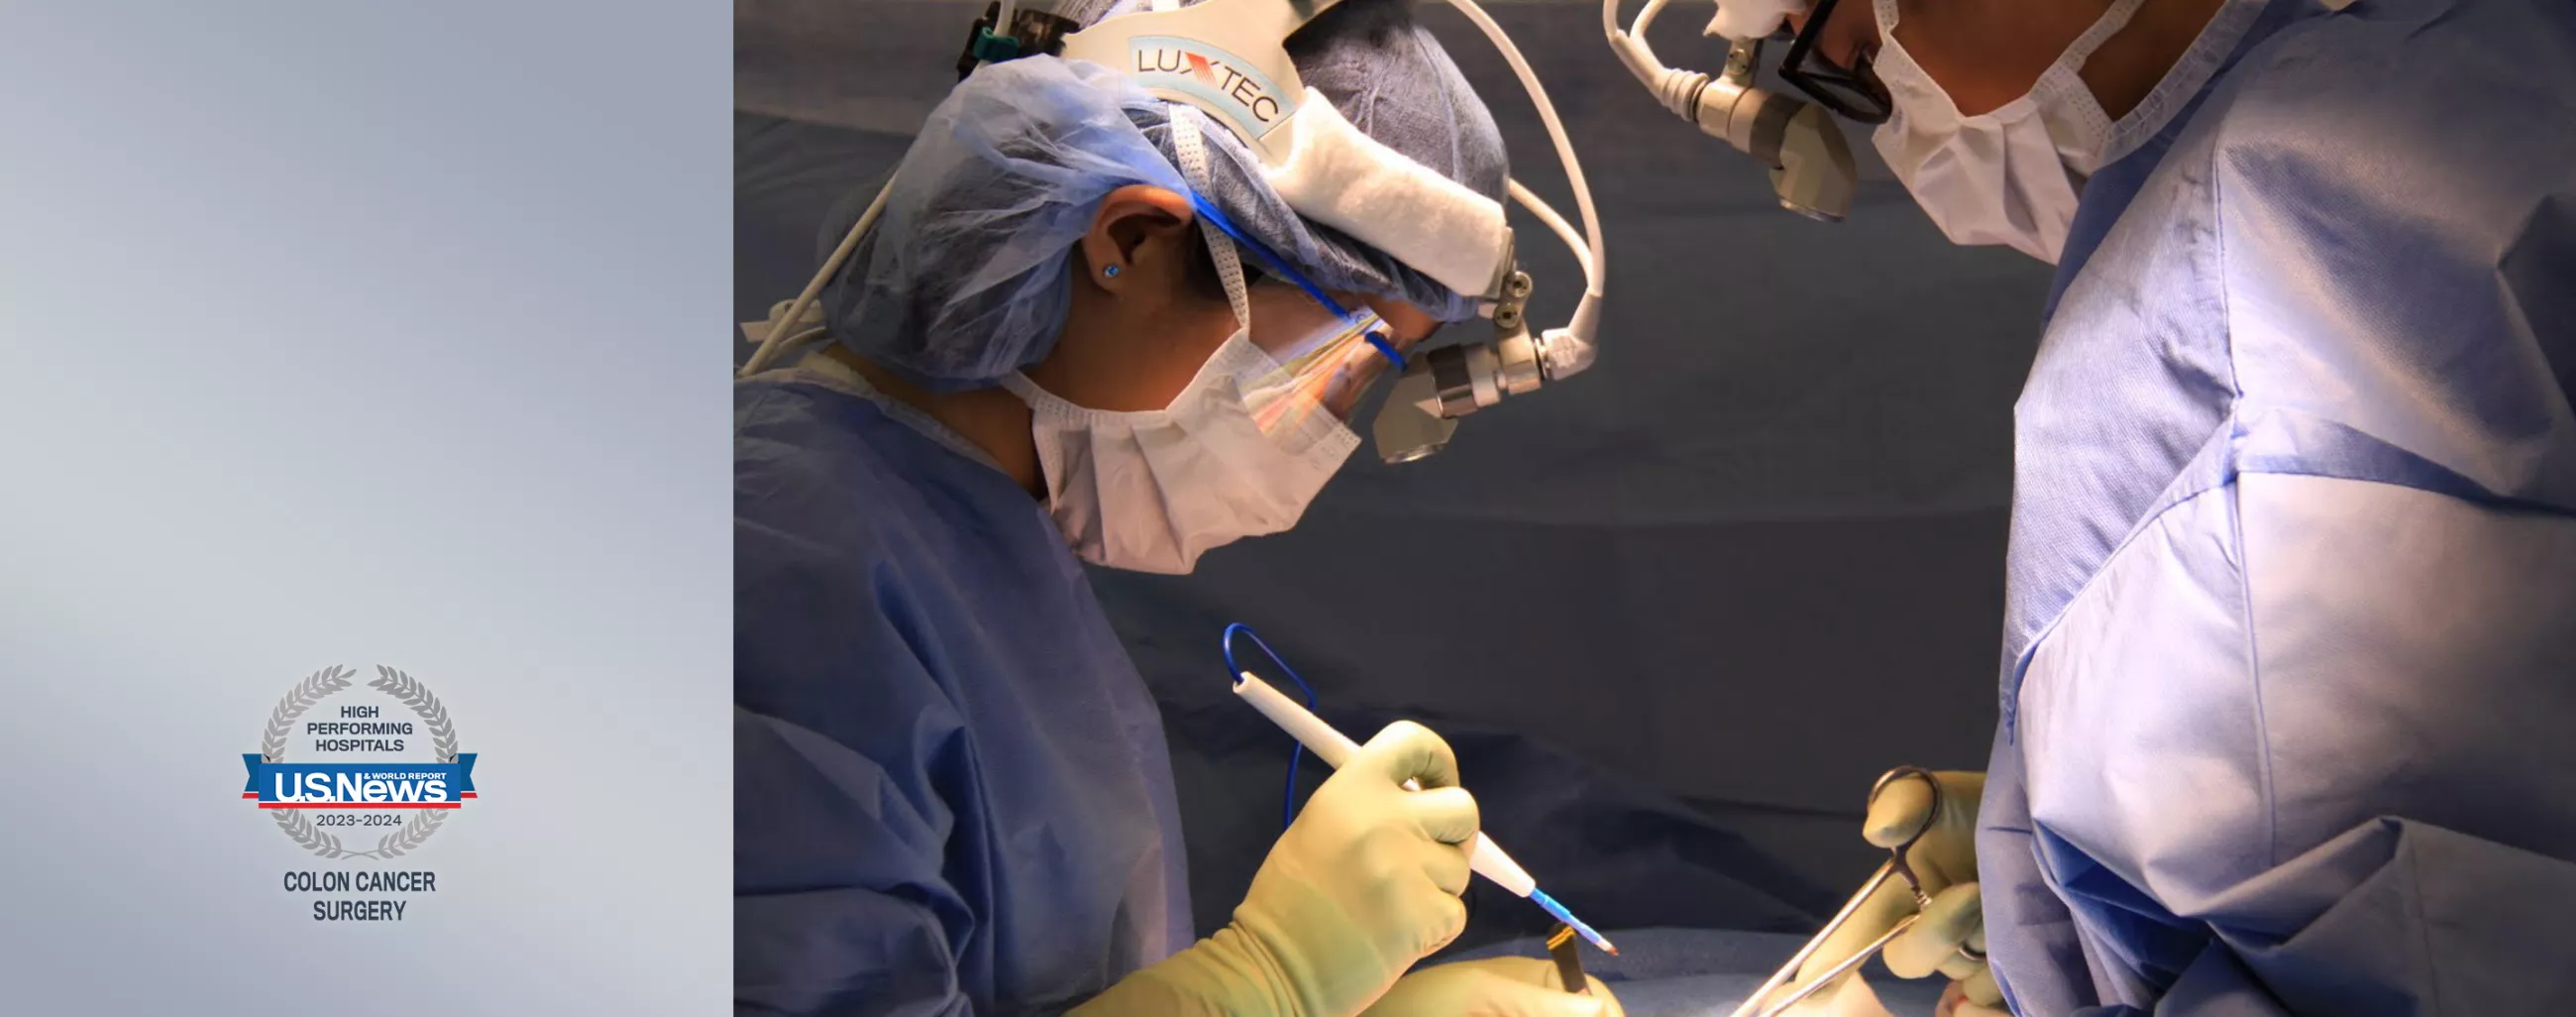 Center for Colorectal Surgery